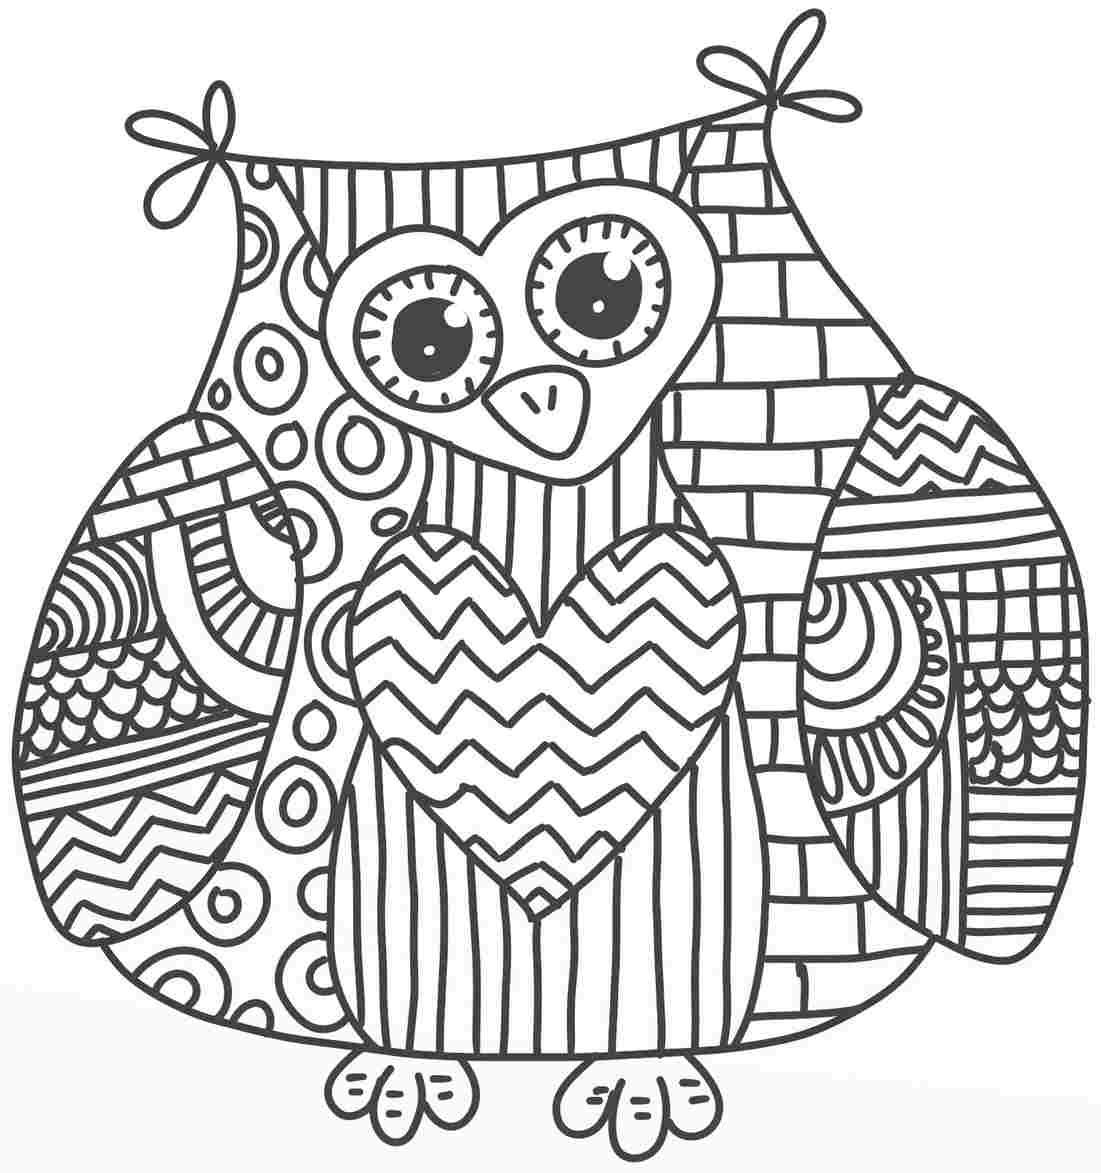 The Best Free Dementia Coloring Page Images Download From 19 Free 